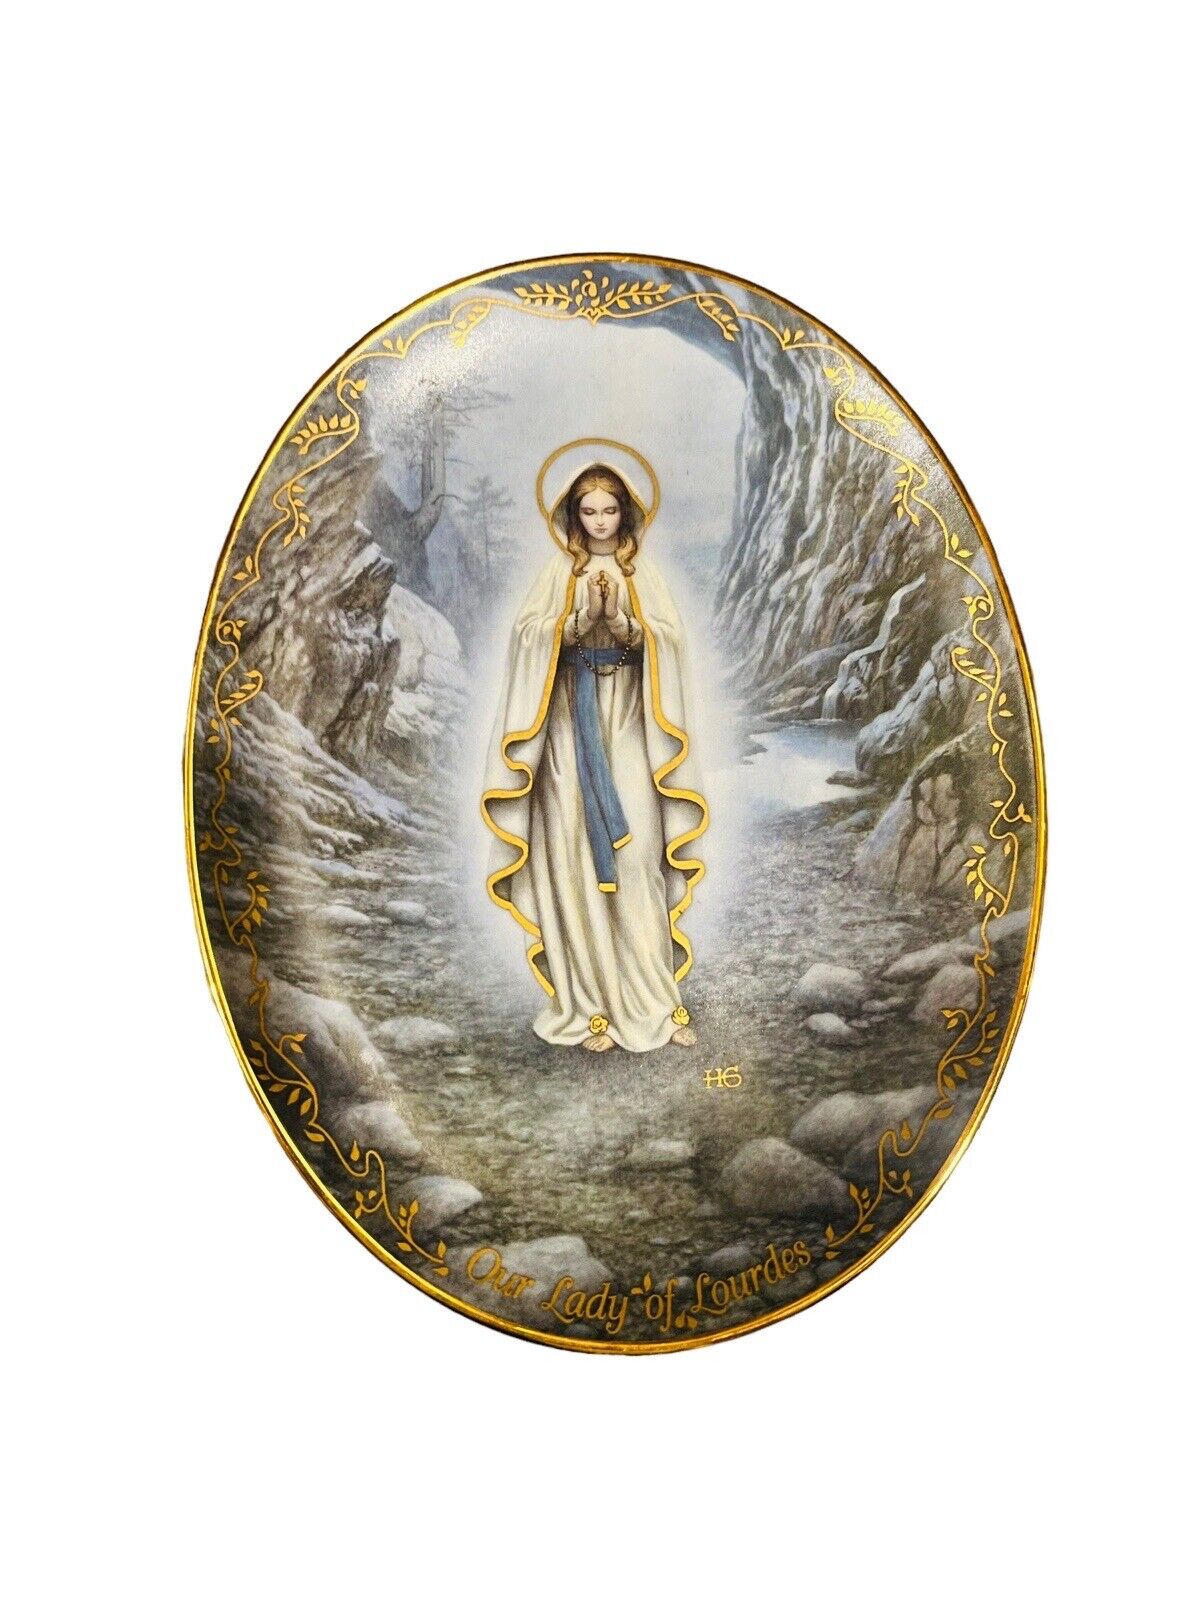 Our Lady Of Lourdes 1994 Collectors Plate Bradford Exchange Plate Number 8524E